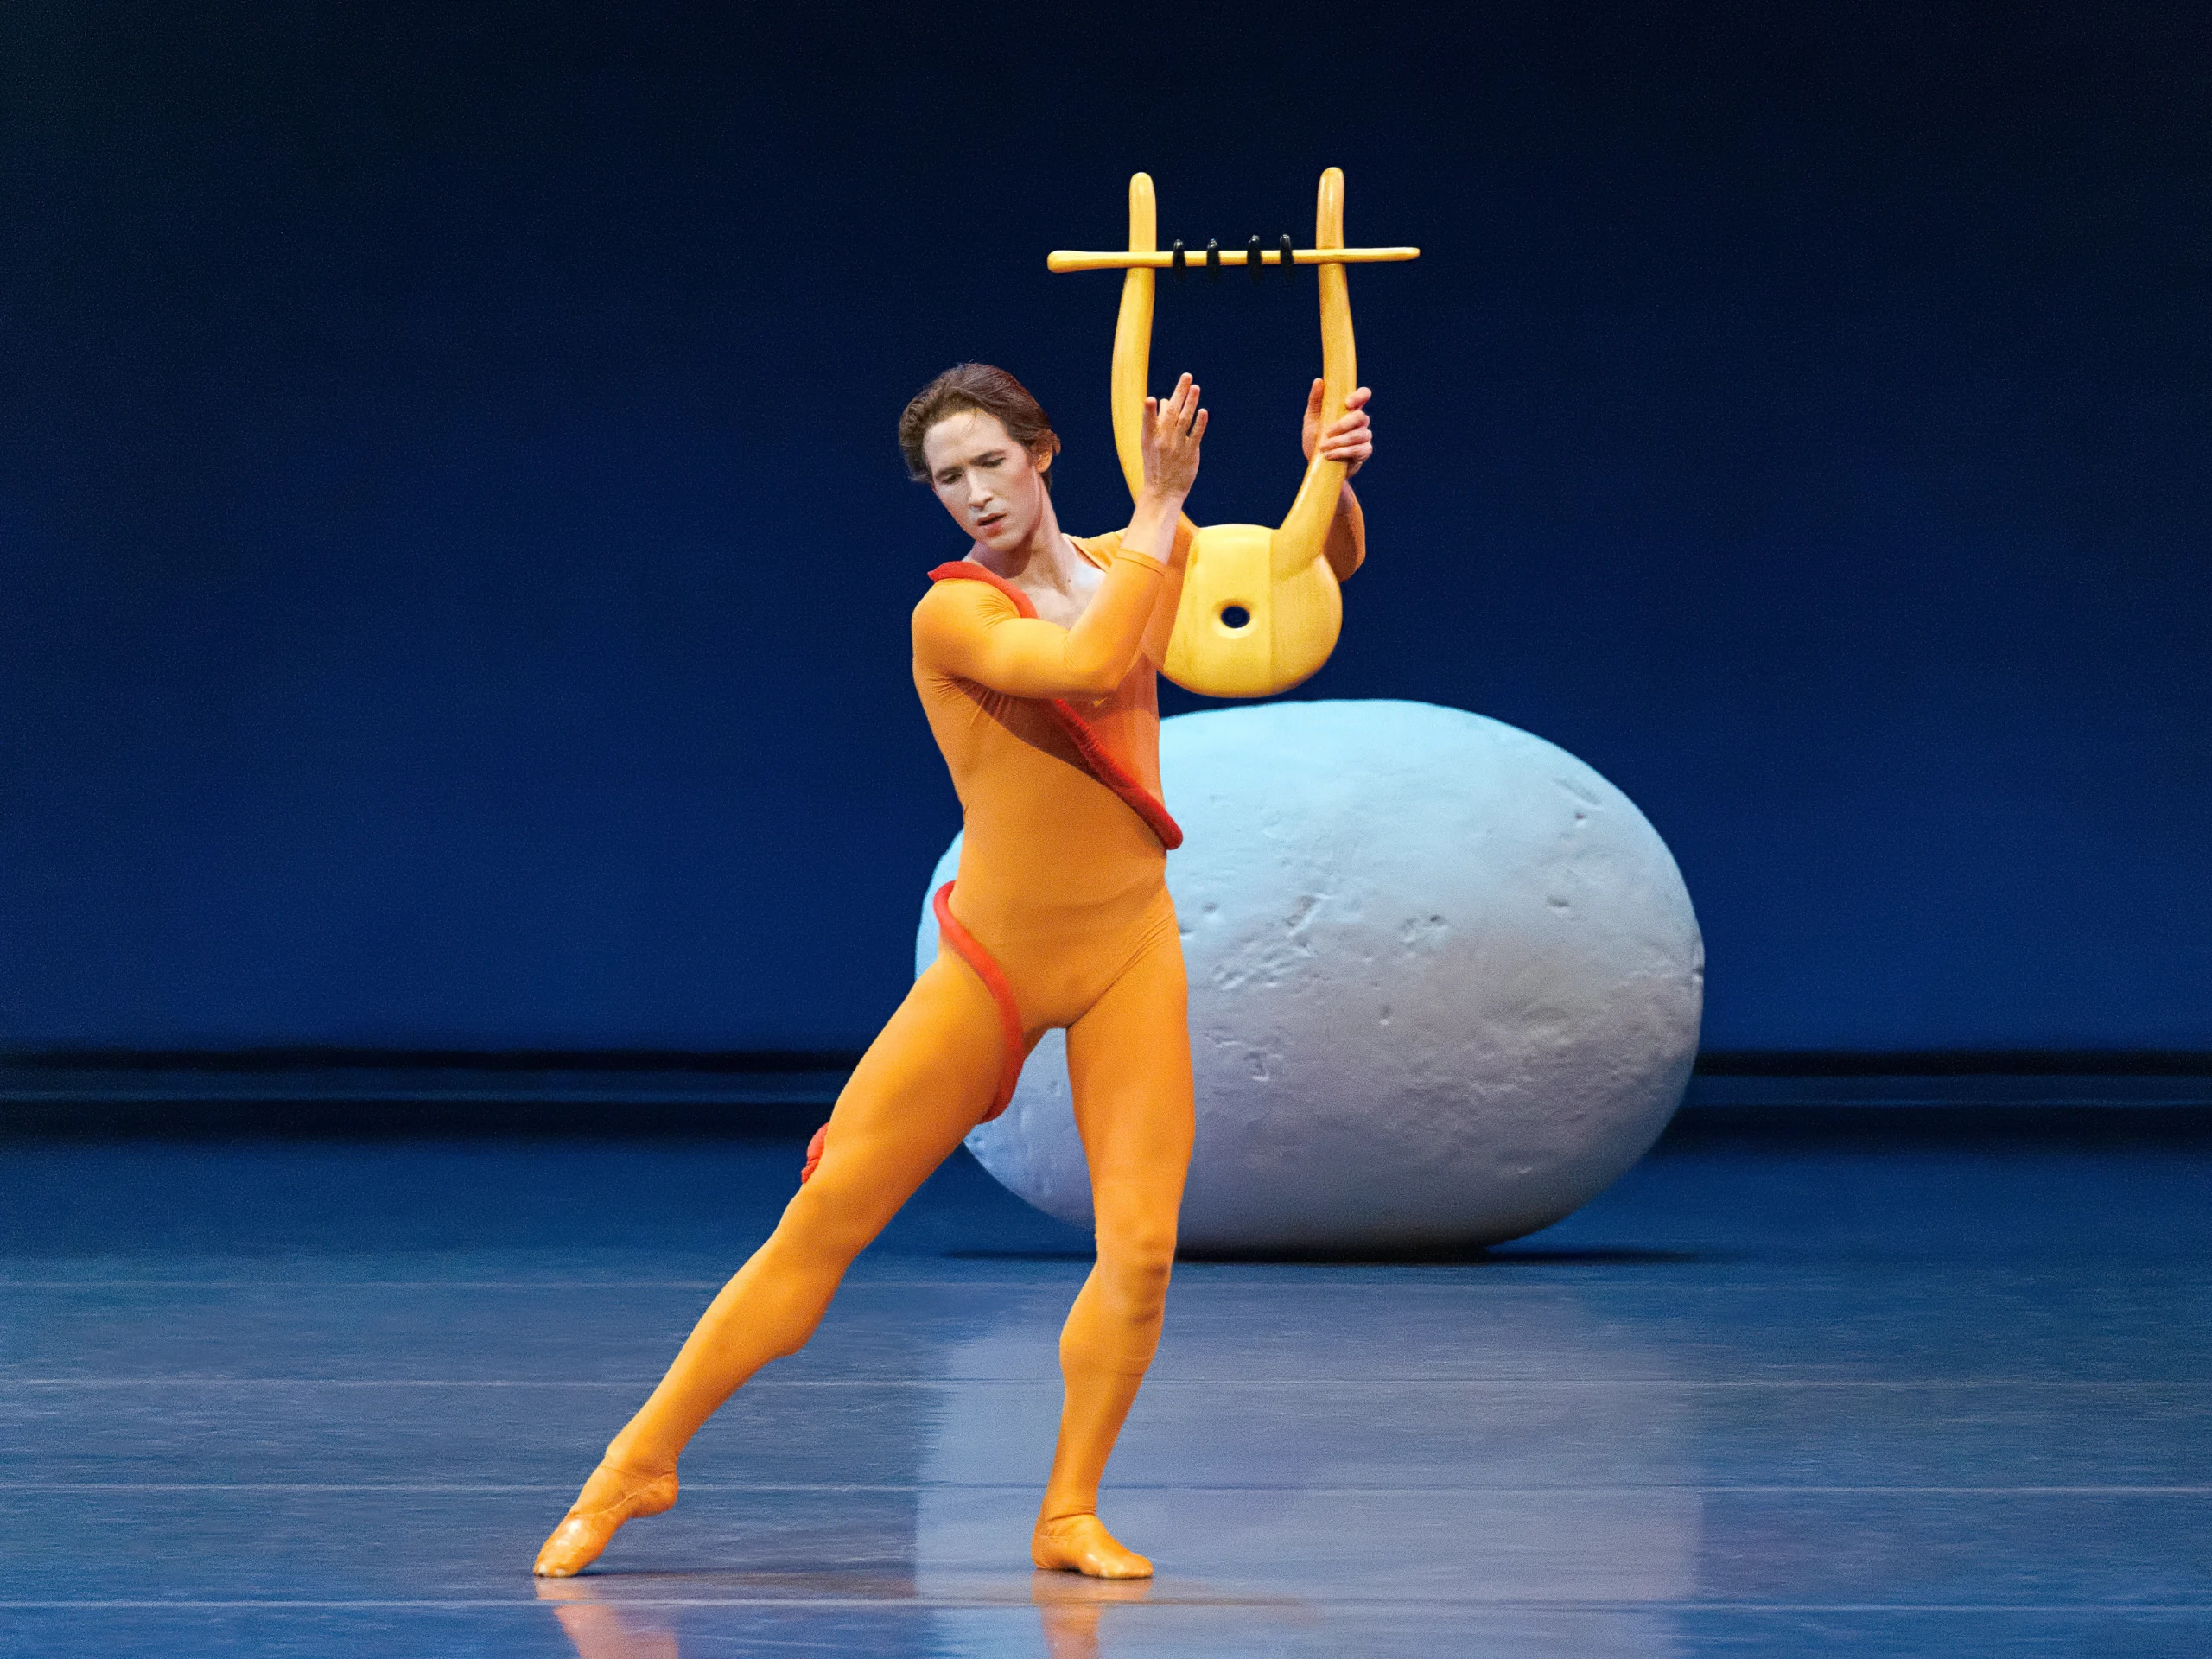 Joseph Gordon dances in "Orpheus" as the title role. He wears a bright yellow-orange unitard and holds a large lyre prop. A rounded rock prop rests behind him.